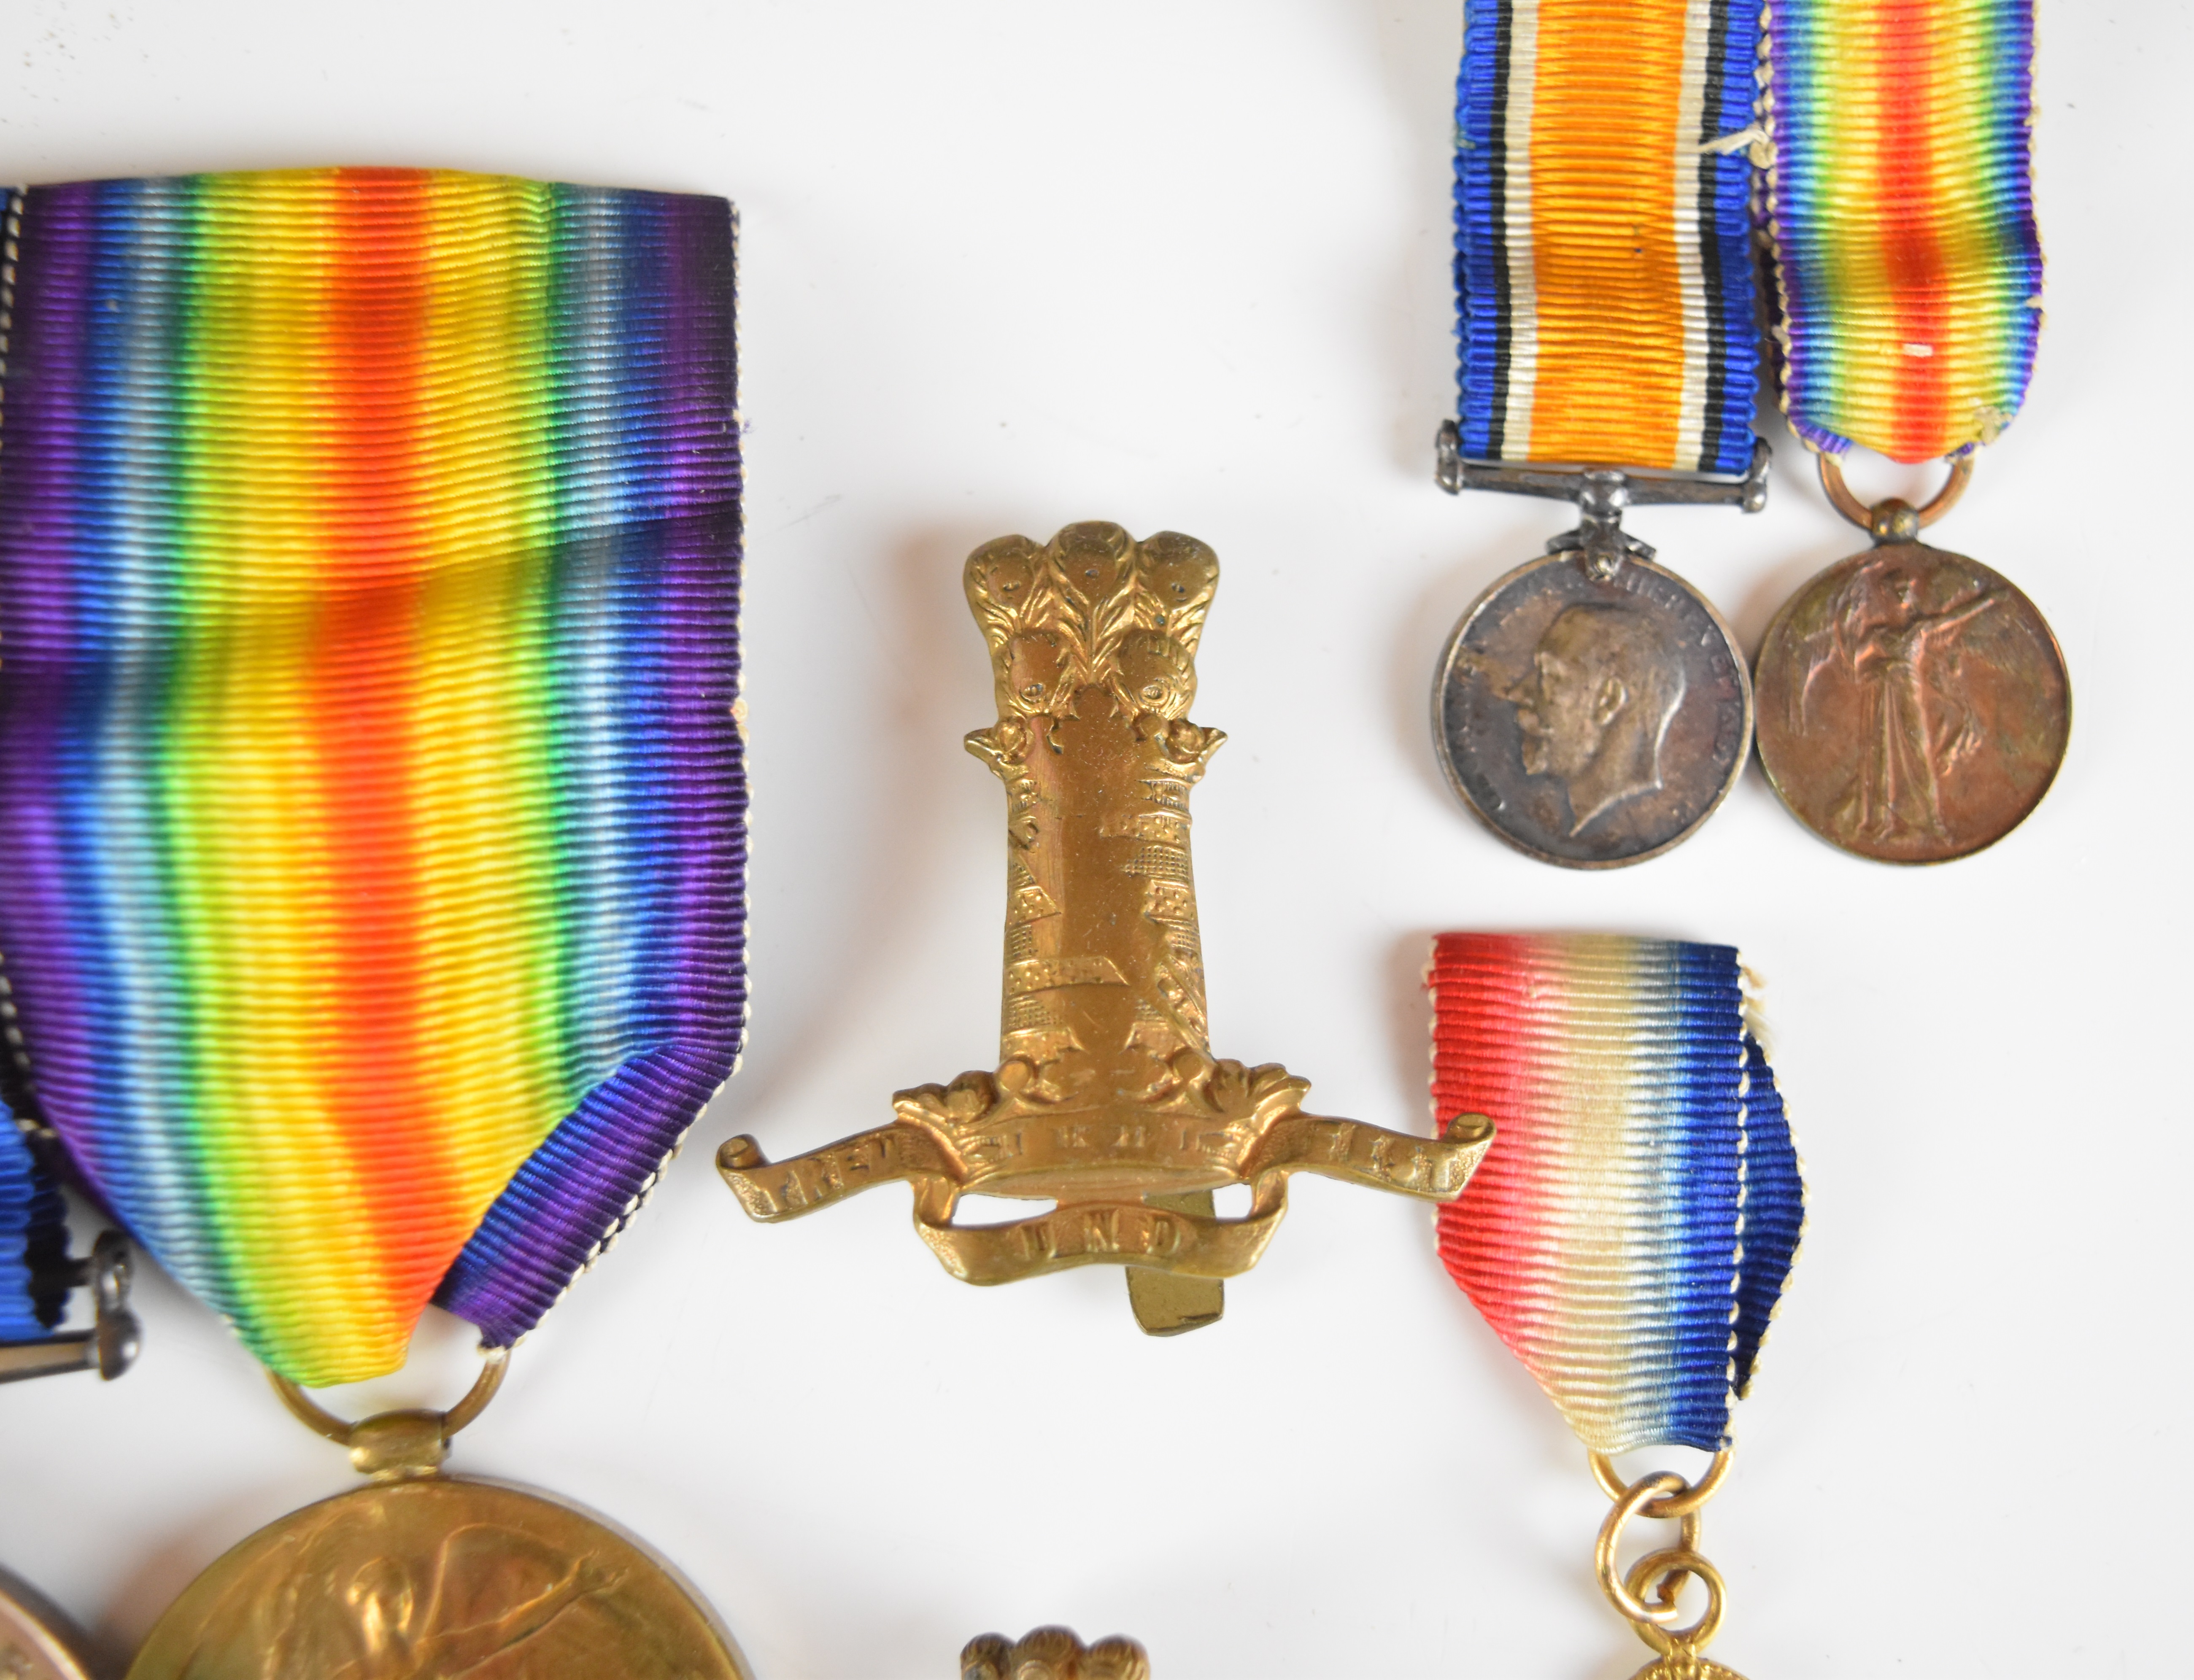 British Army WW1 11th Hussars medal trio comprising 1914 'Mons' Star with clasp for 5th August to - Image 4 of 13